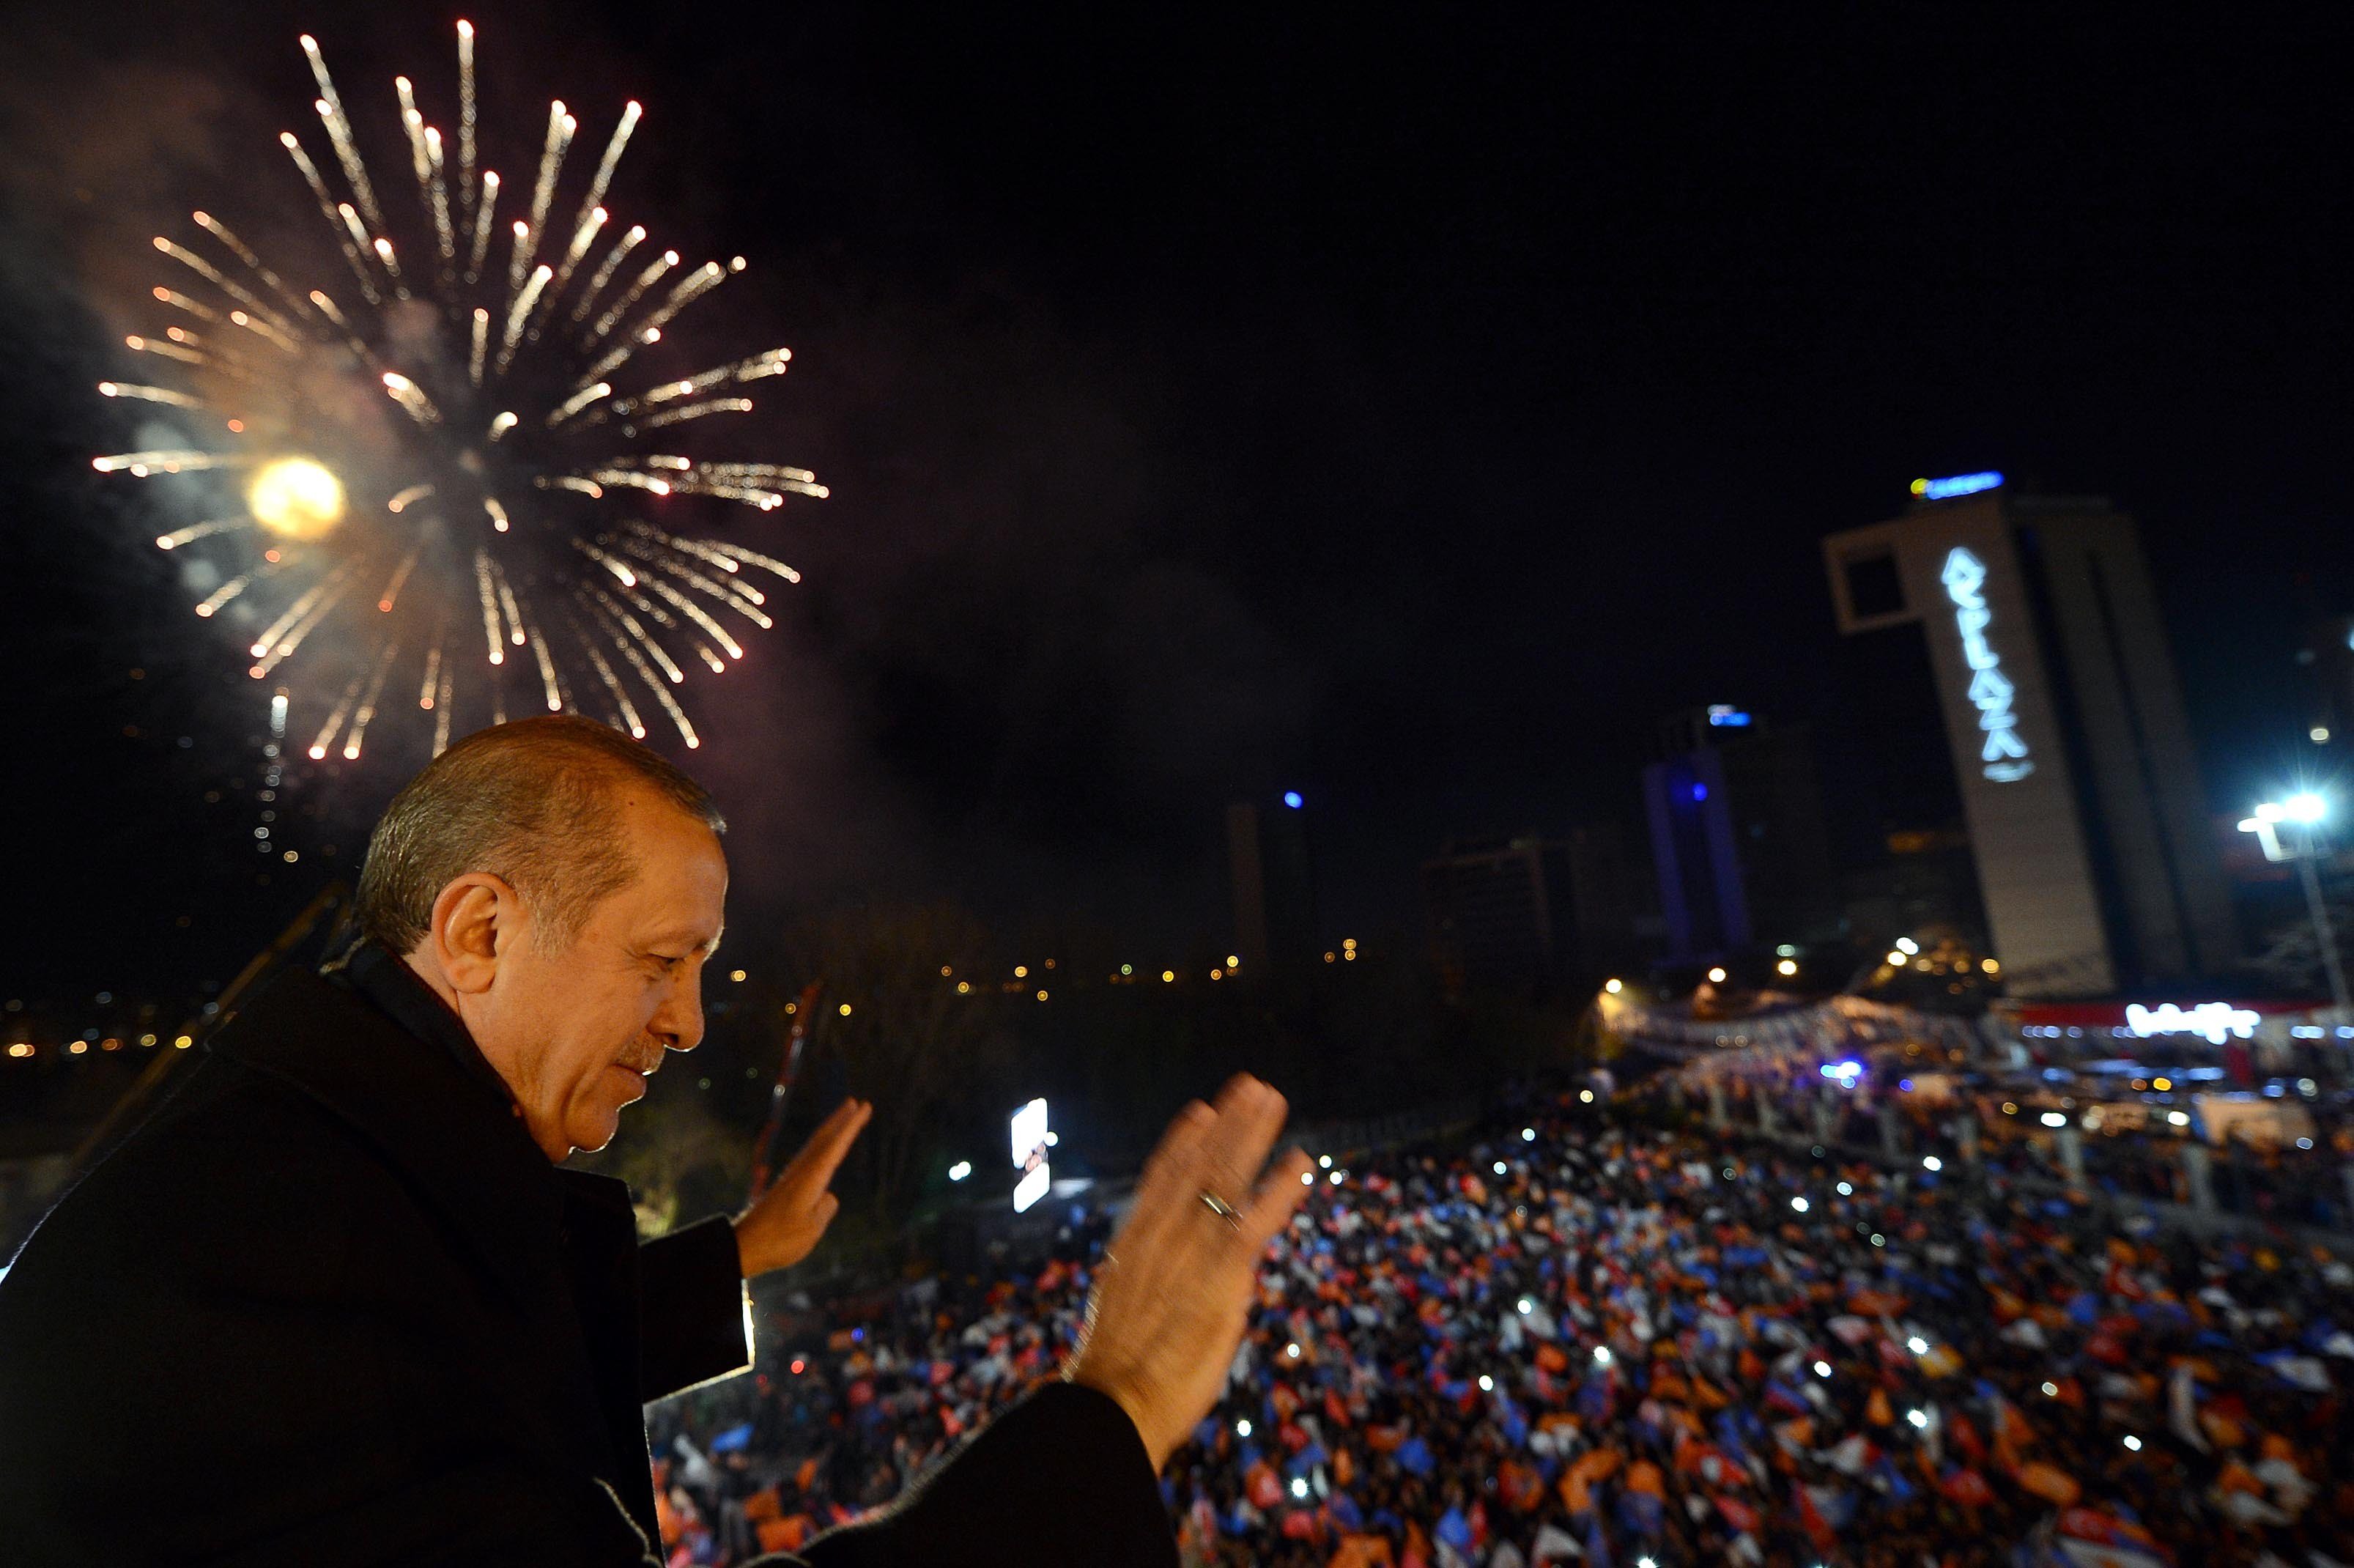 Turkey's Prime Minister Tayyip Erdogan greets his supporters in Ankara on March 30, 2014. (Kayhan Ozer—AFP/Getty Images)